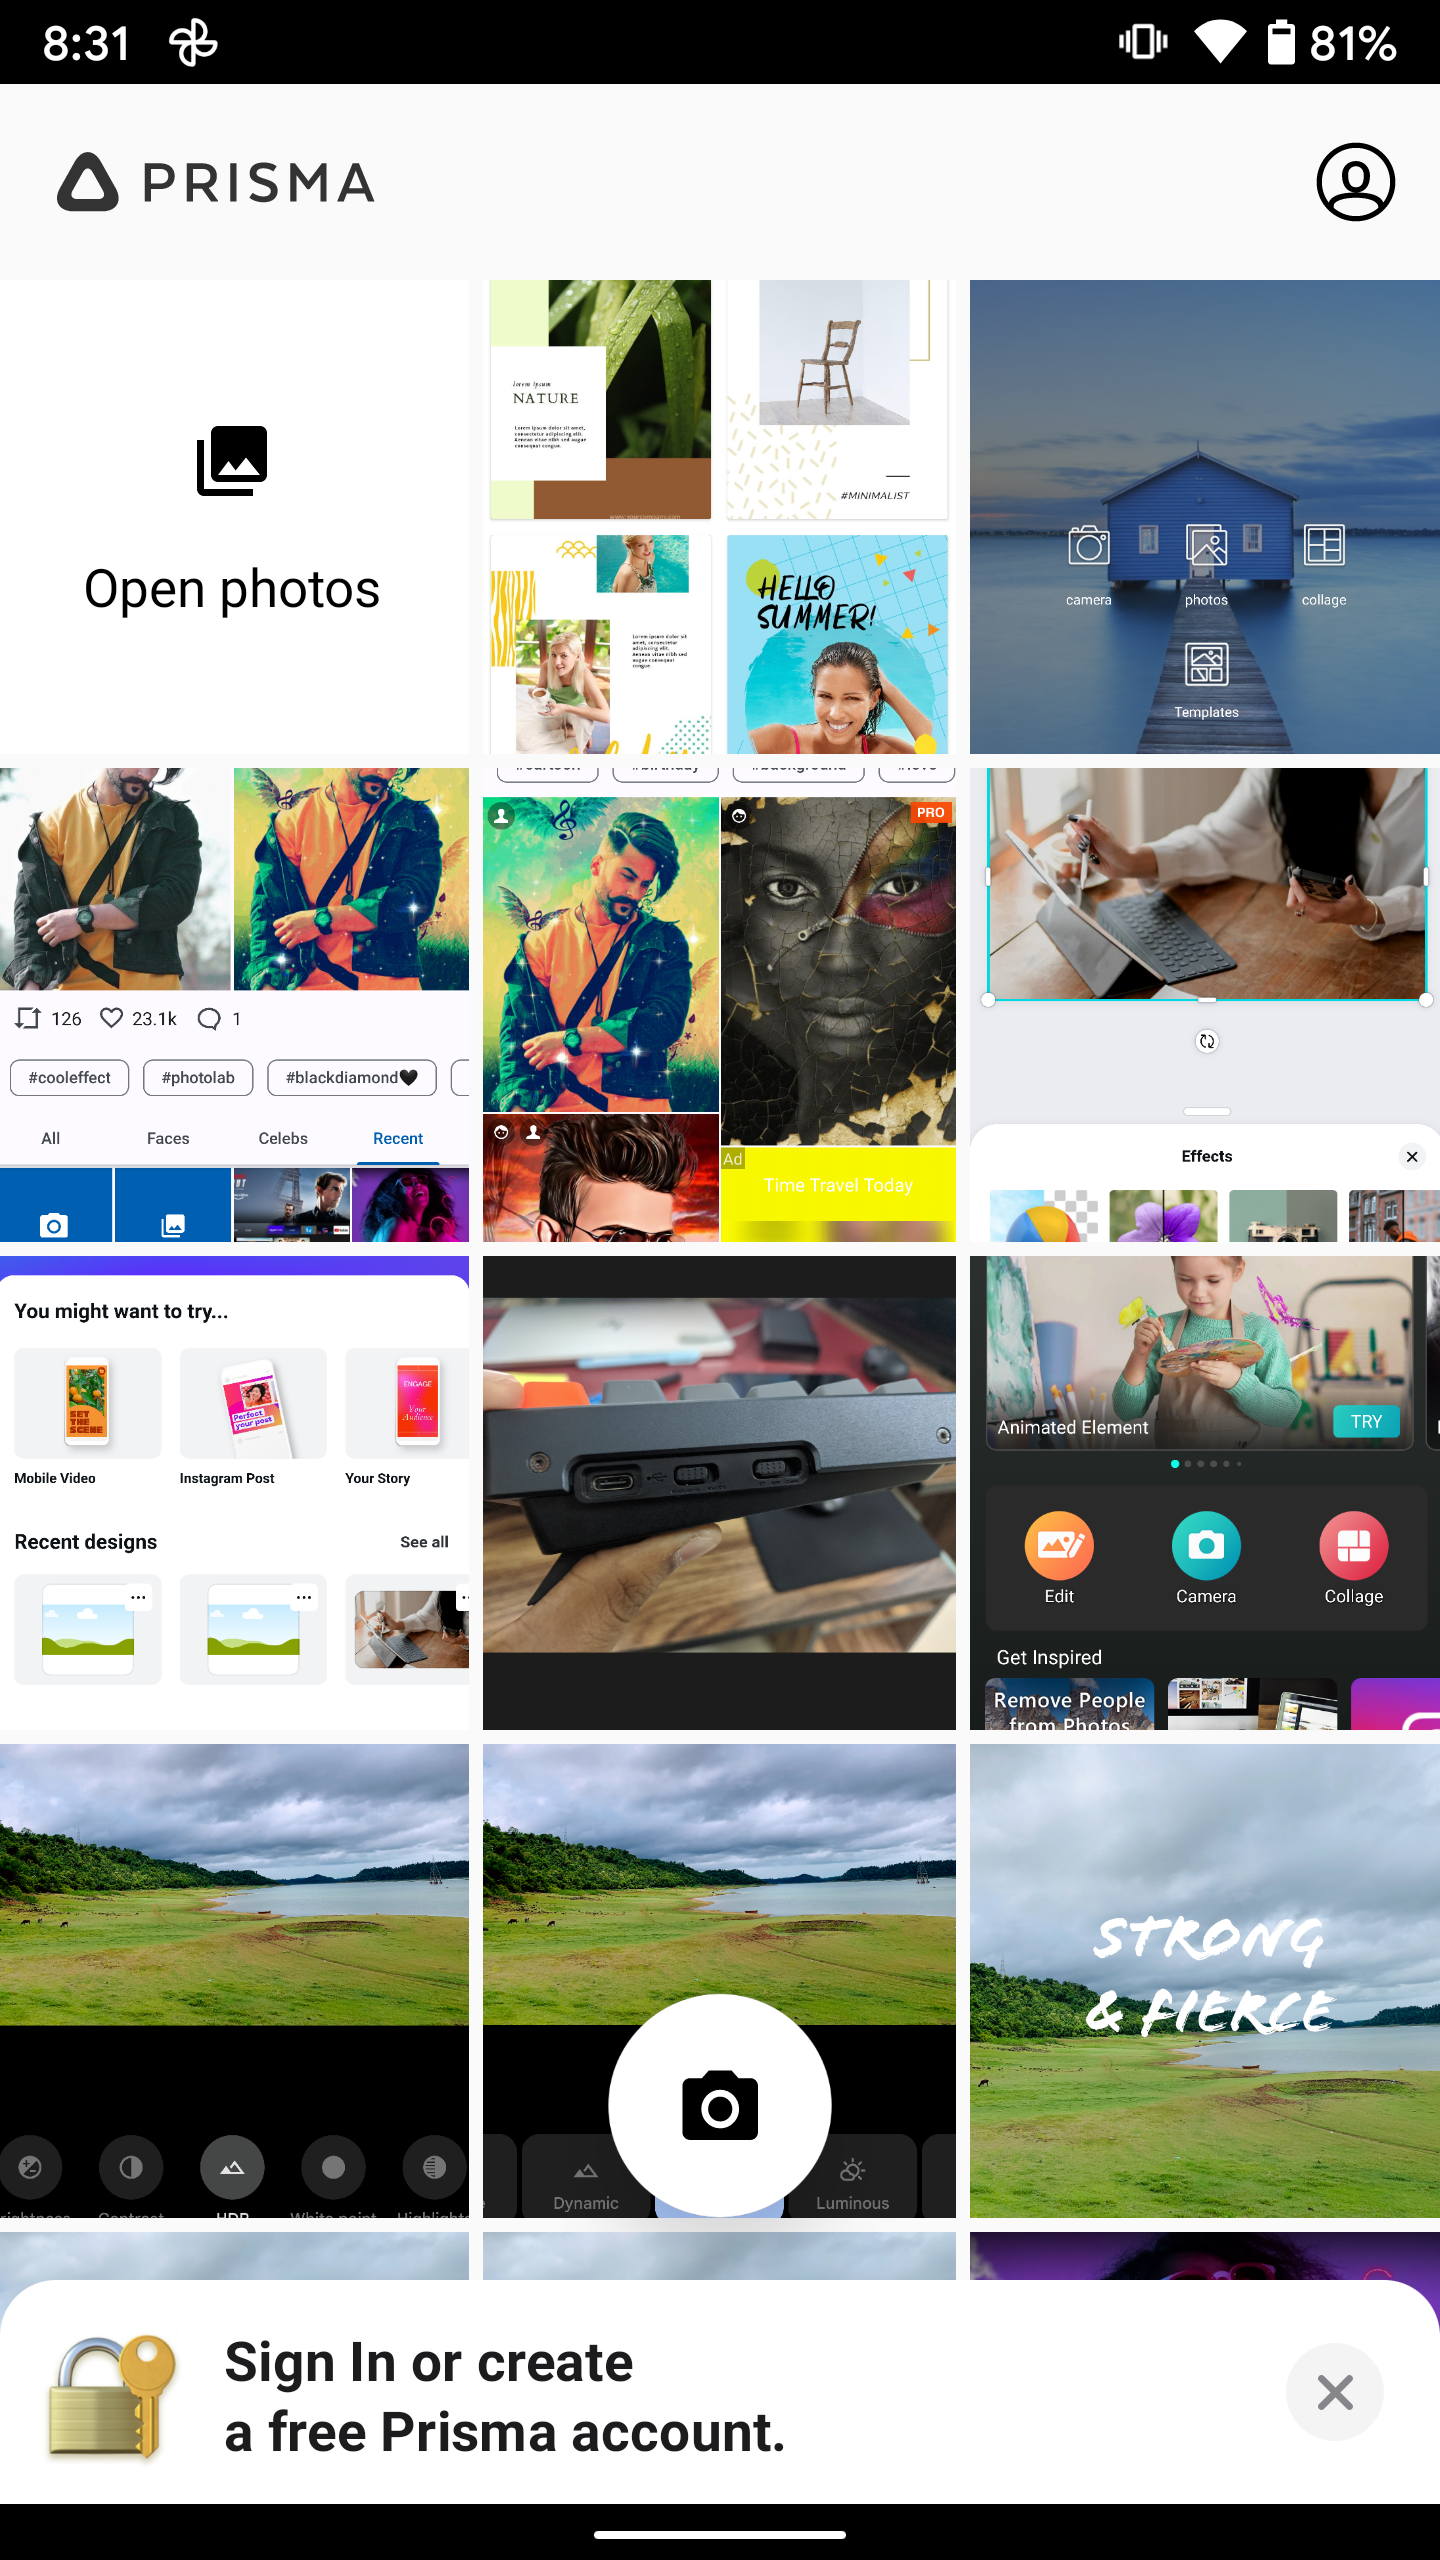 The Prisma app homepage showing a collage a photos